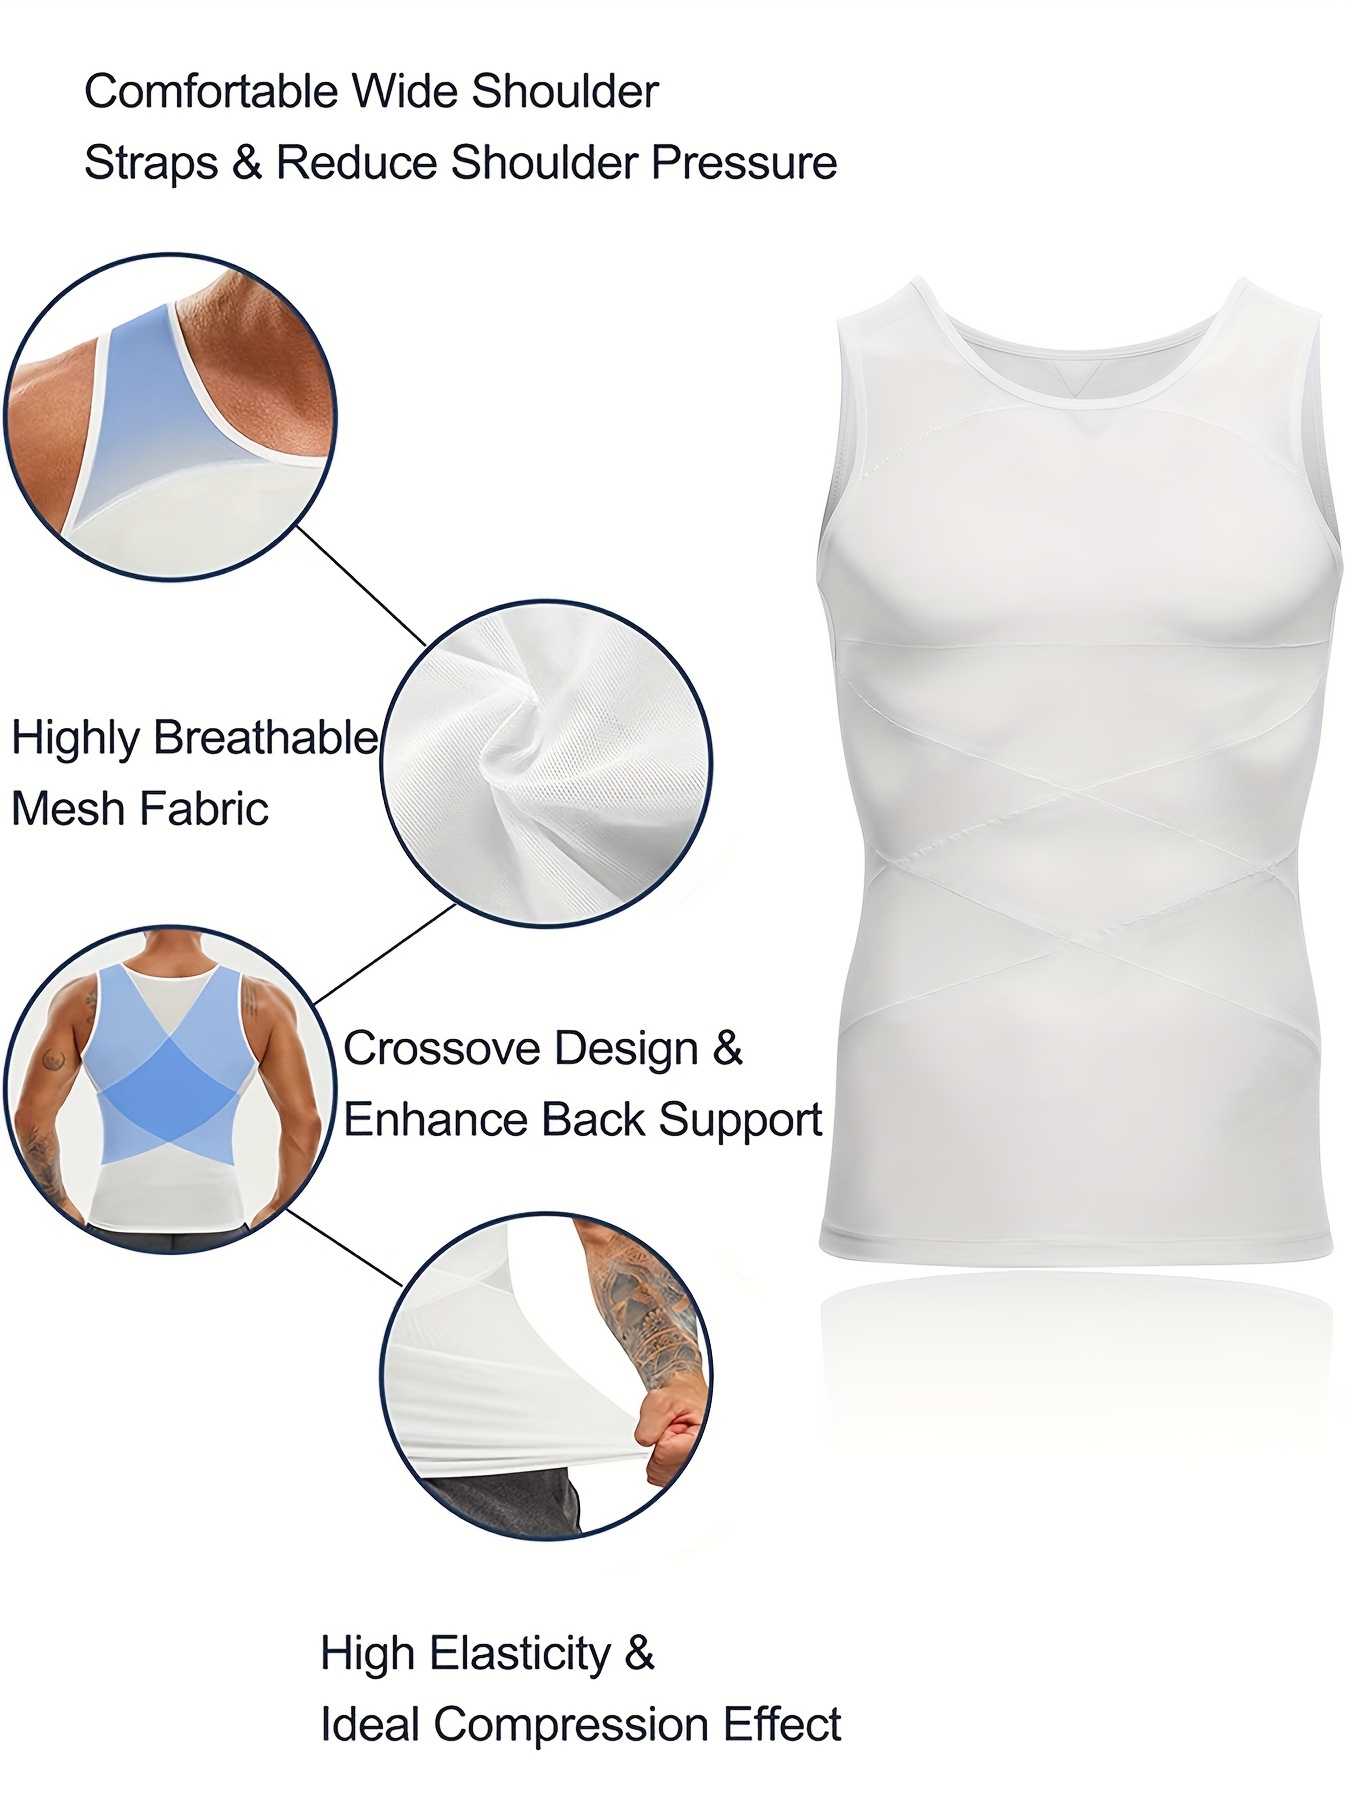 Lizzy Men's Slimming Vest| Seamless and Comfortable Body Shaper Vest |Slim  Chest Belly Waist Compression Shirt